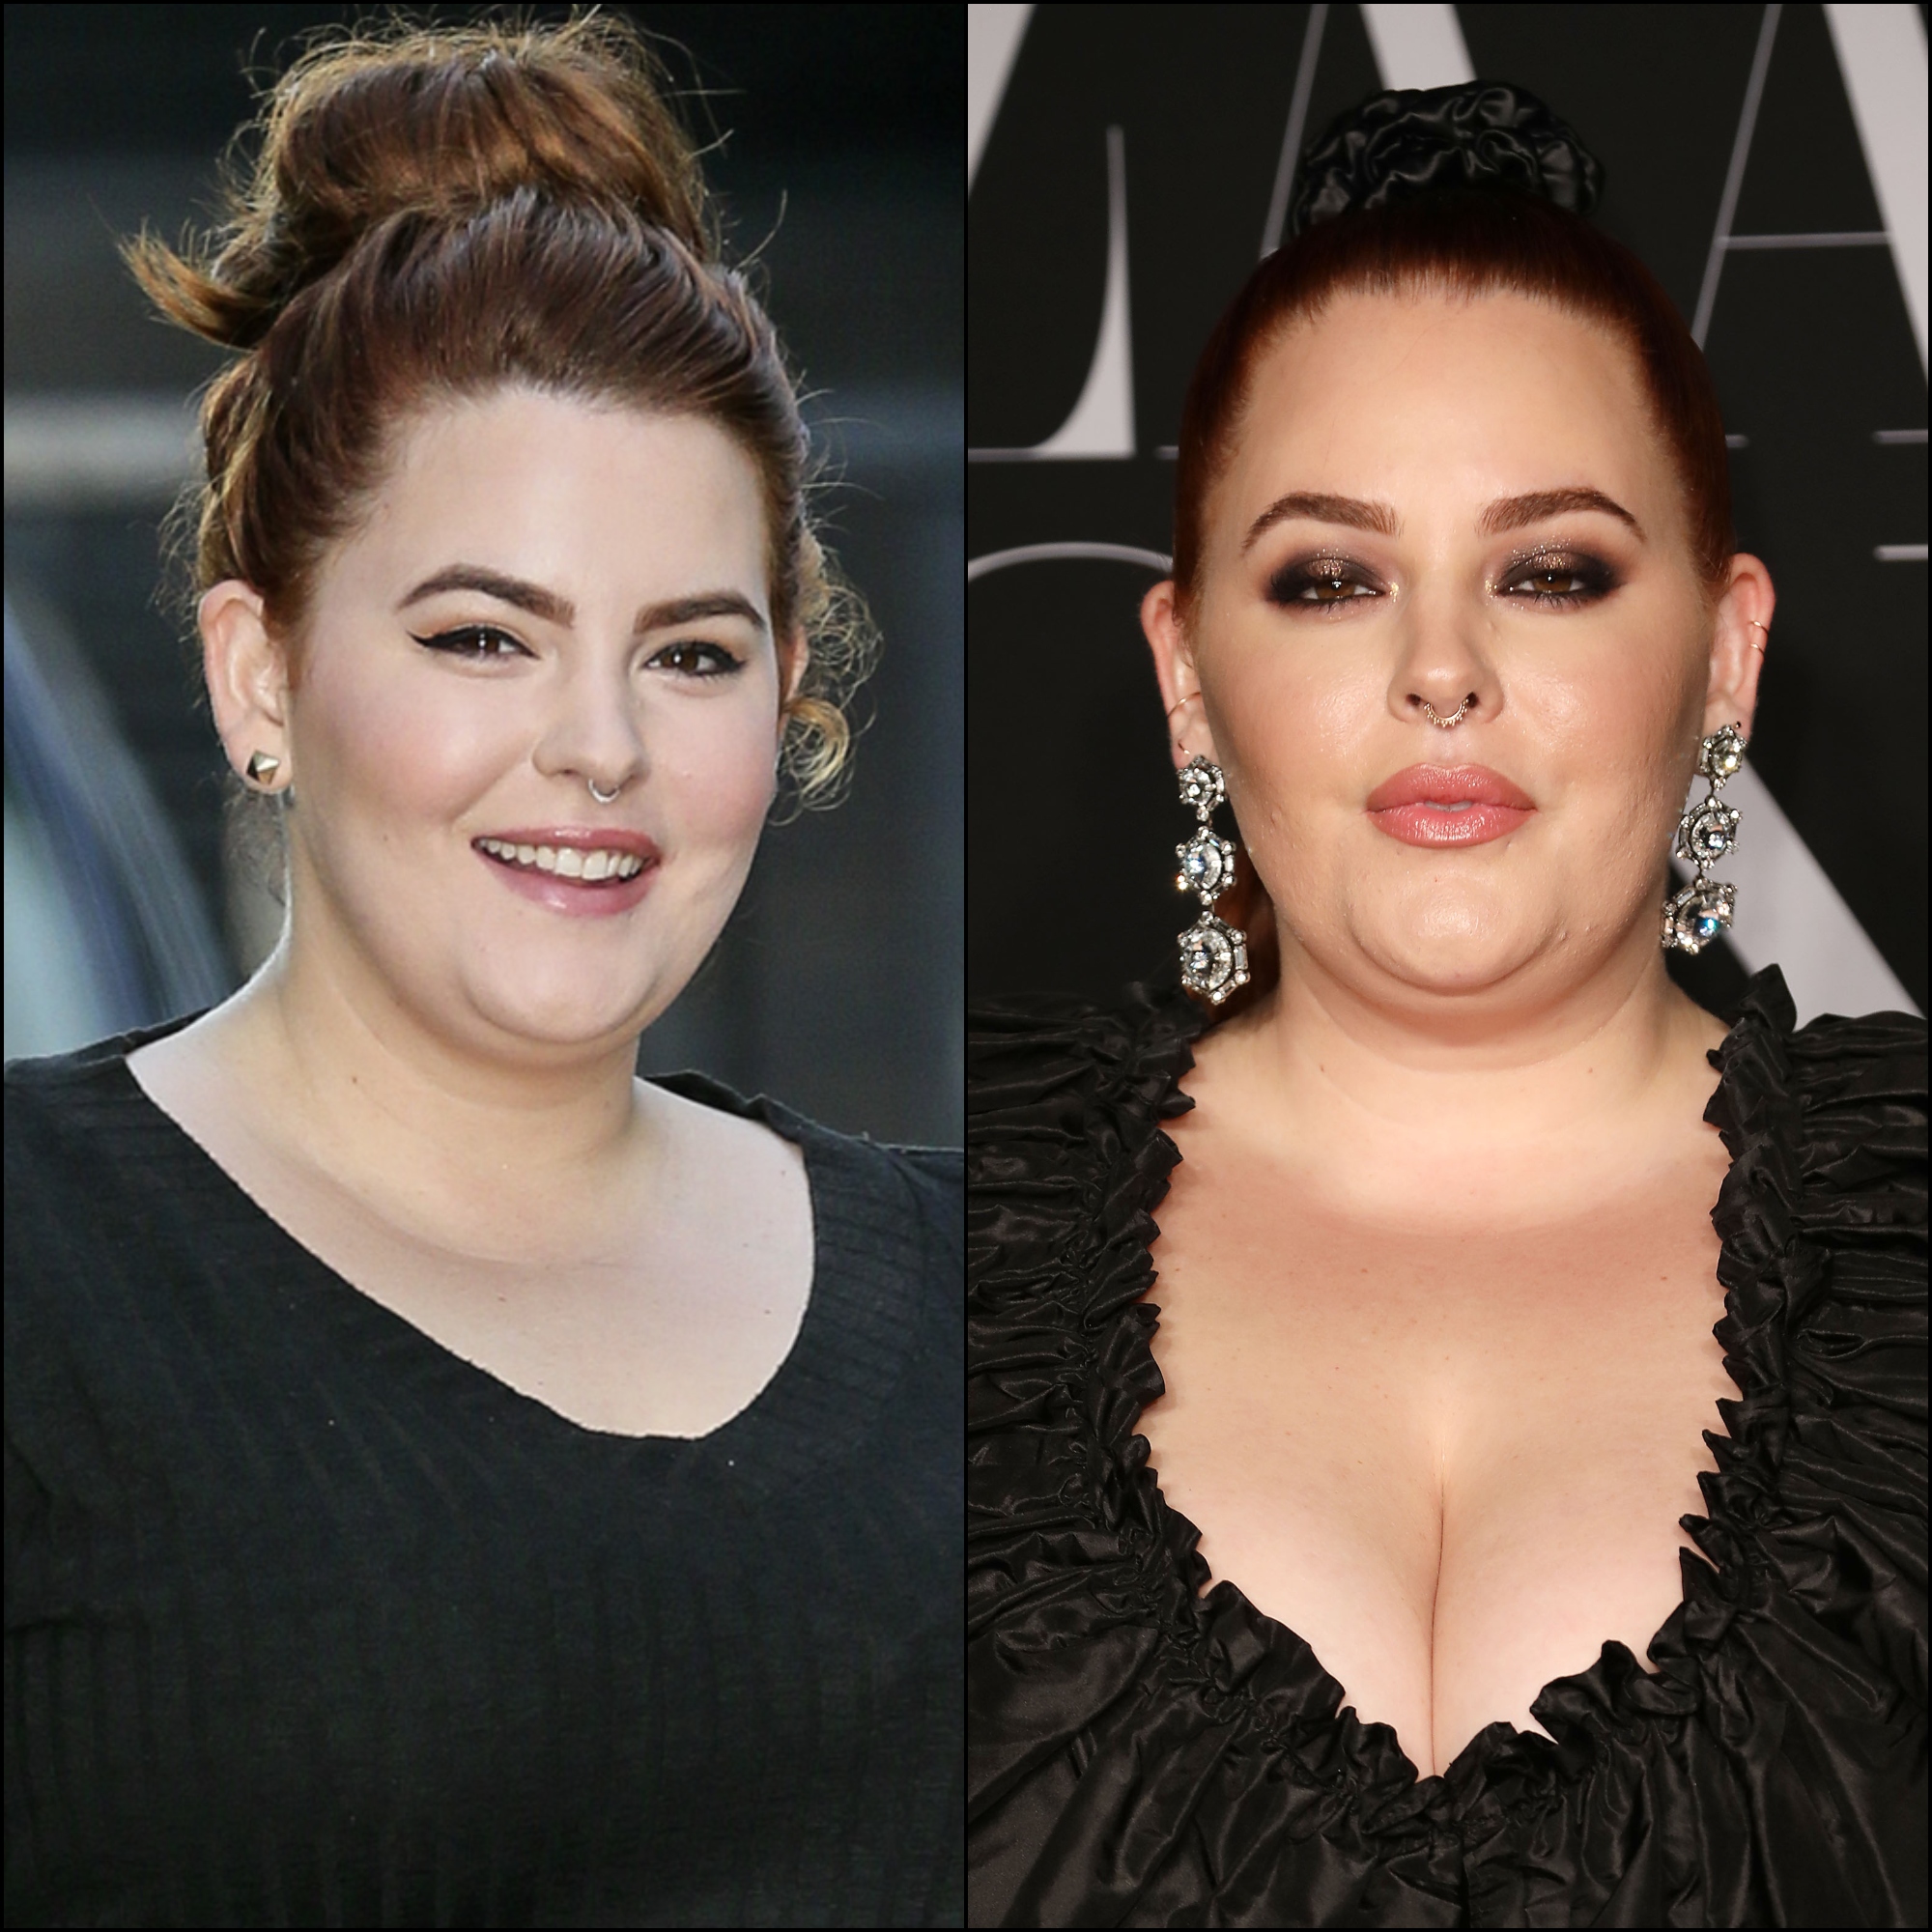 Tess Holliday Plastic Surgery: What Procedures Has the Model Done